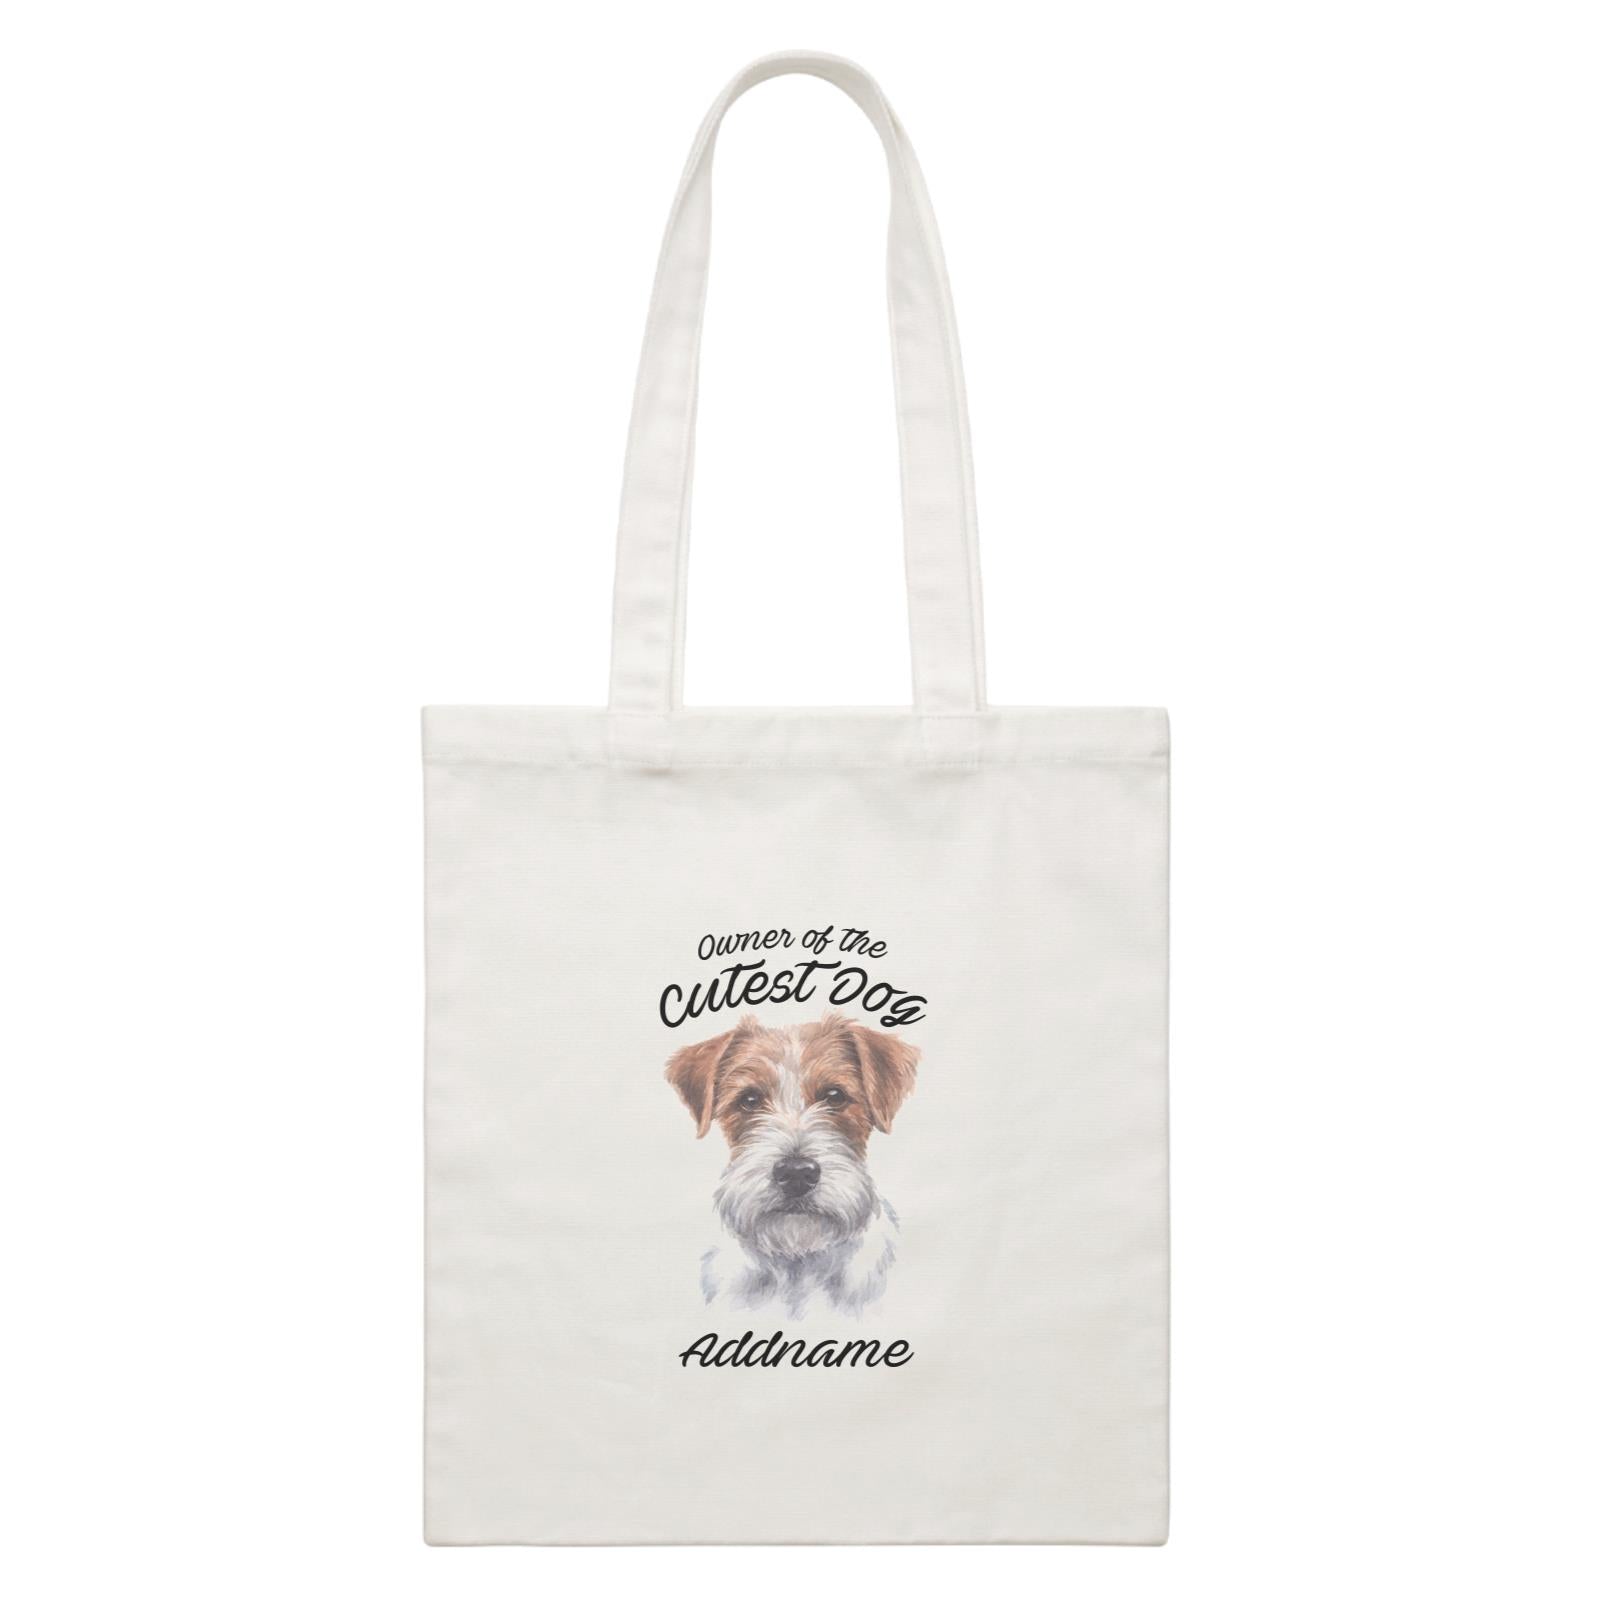 Watercolor Dog Owner Of The Cutest Dog Jack Russell Long Hair Addname White Canvas Bag